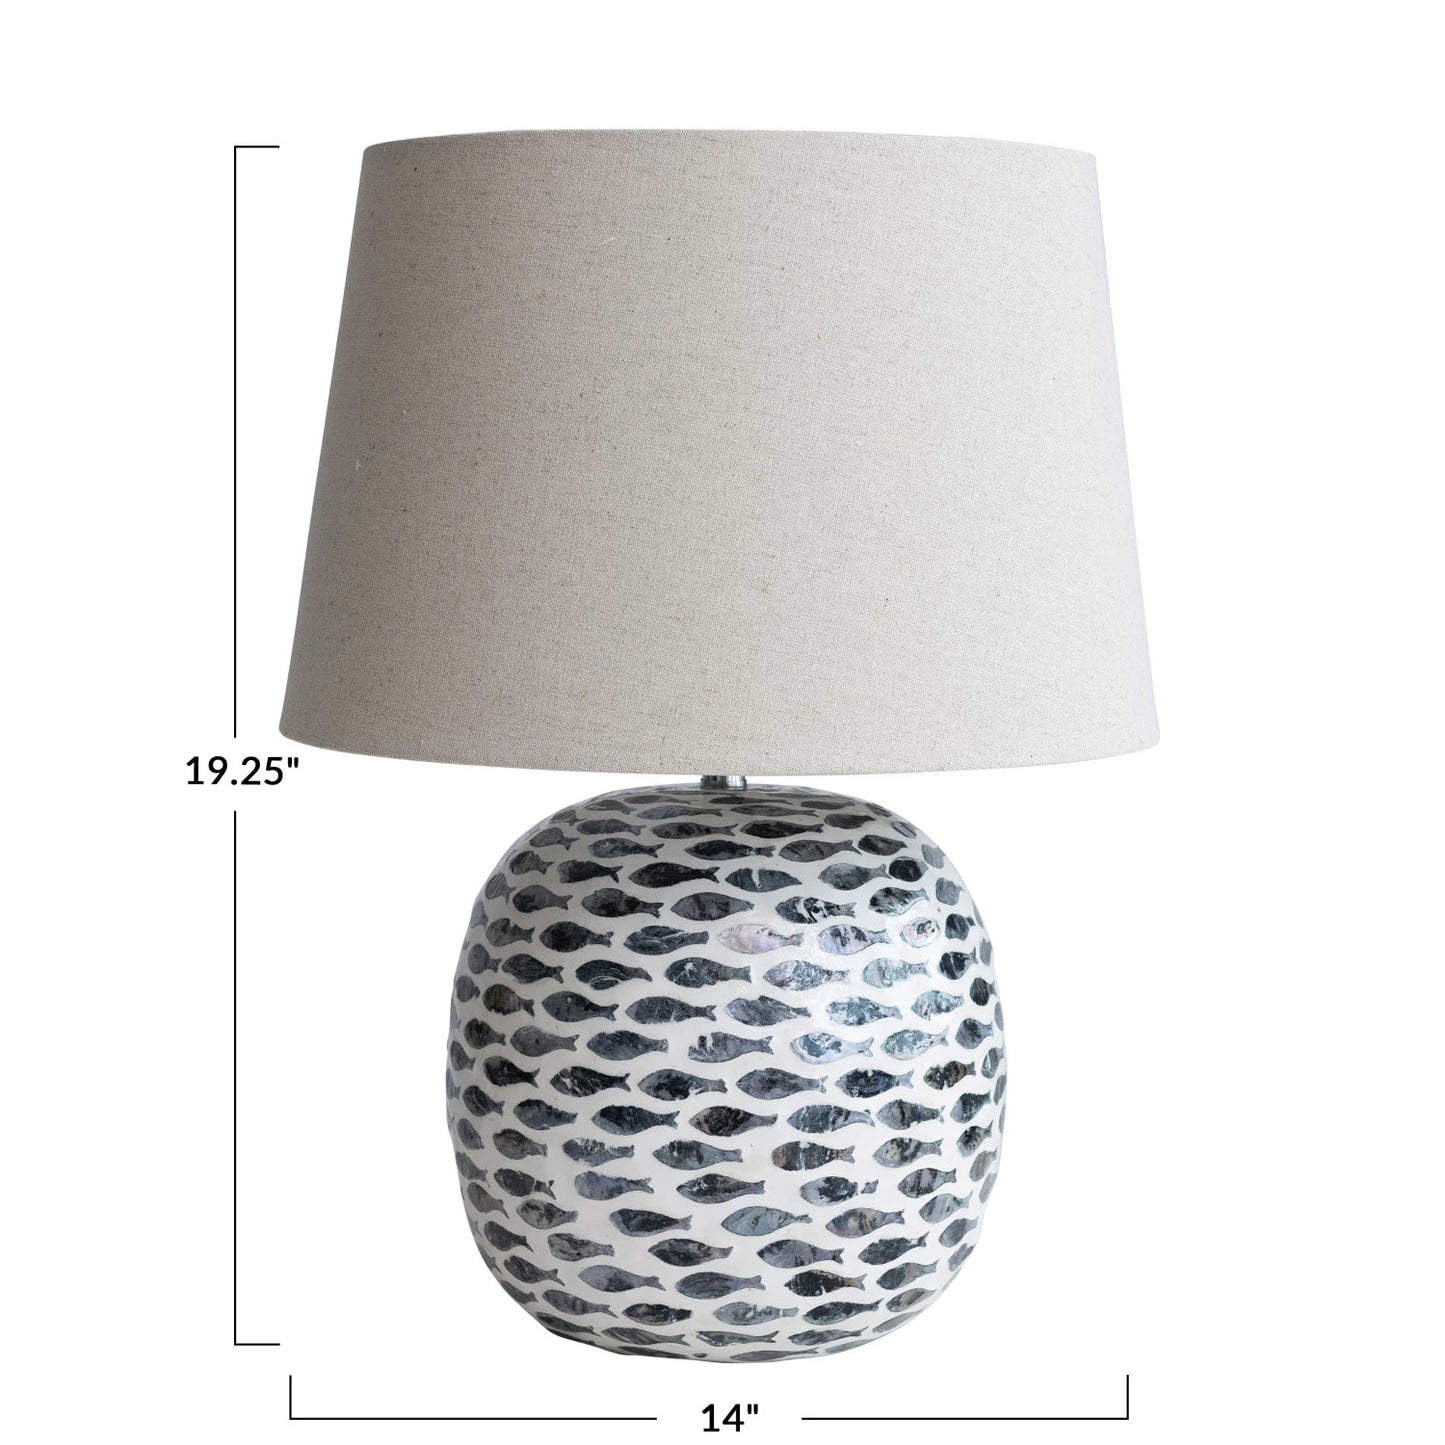 Lamp Tabletop Bamboo Fish Pattern Linen Shade Blue & White 14" Round x 19.25" High